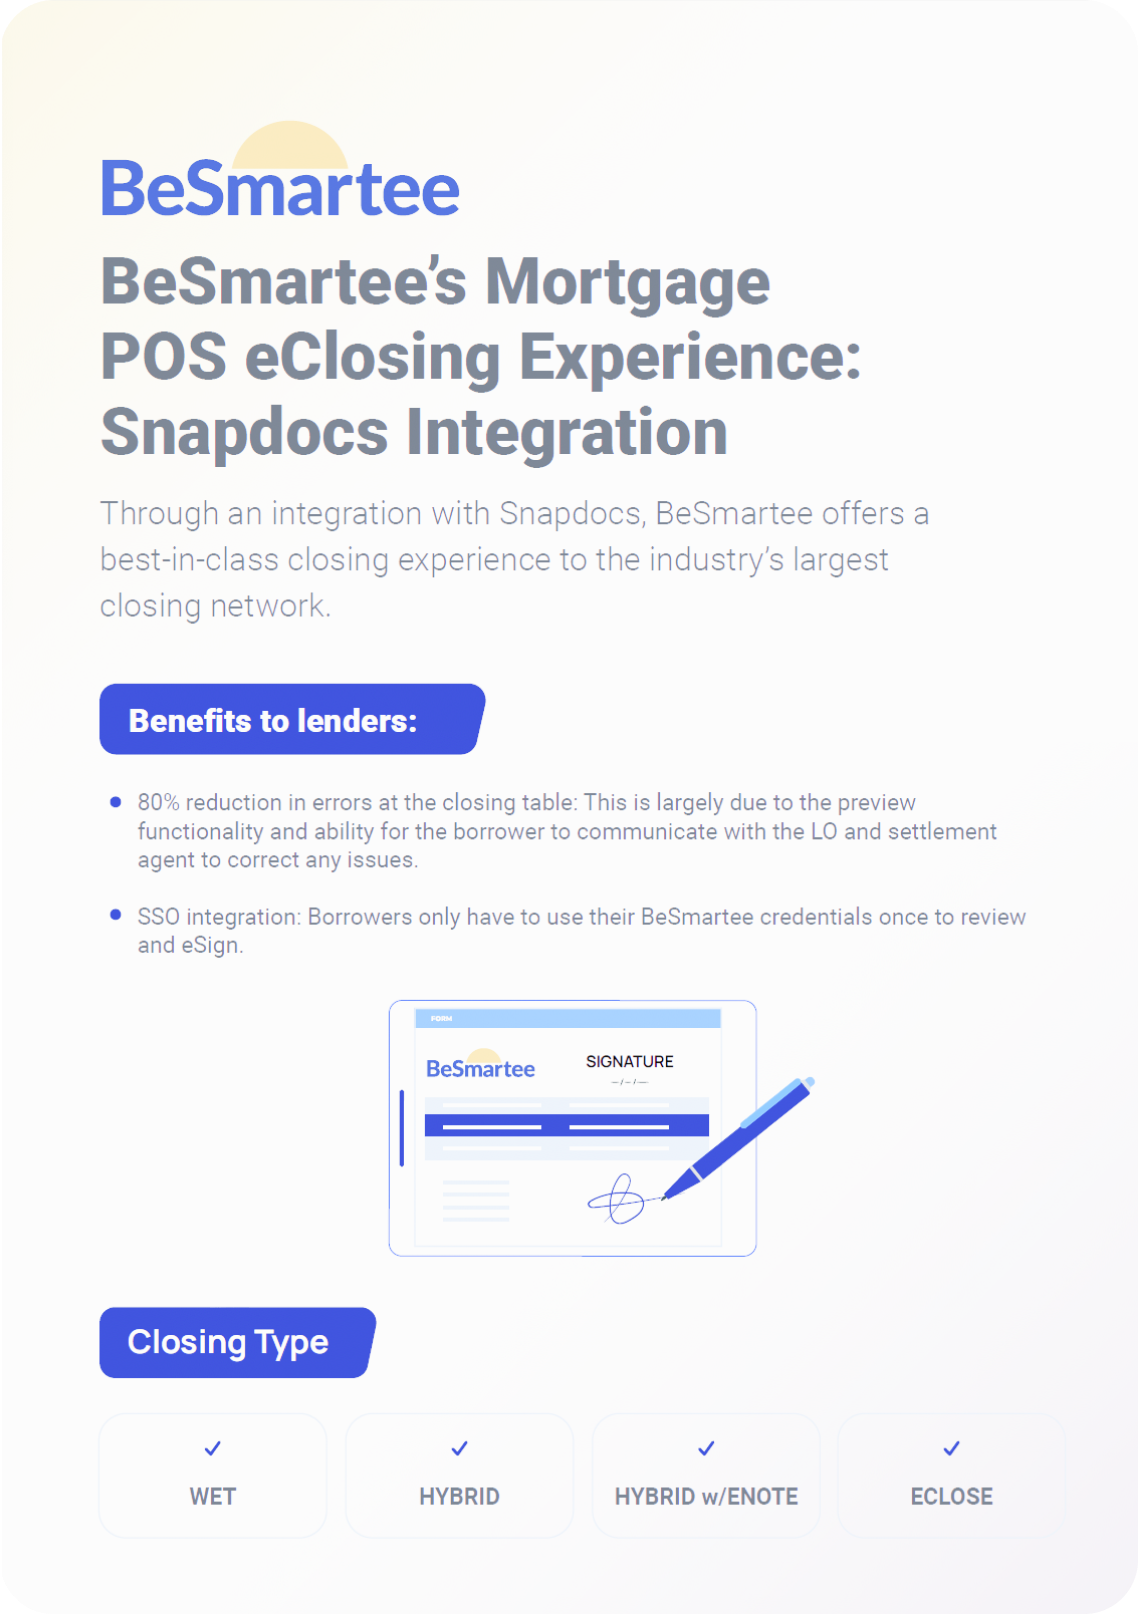 BeSmartee’s Mortgage POS eClosing Experience: Snapdocs Integration